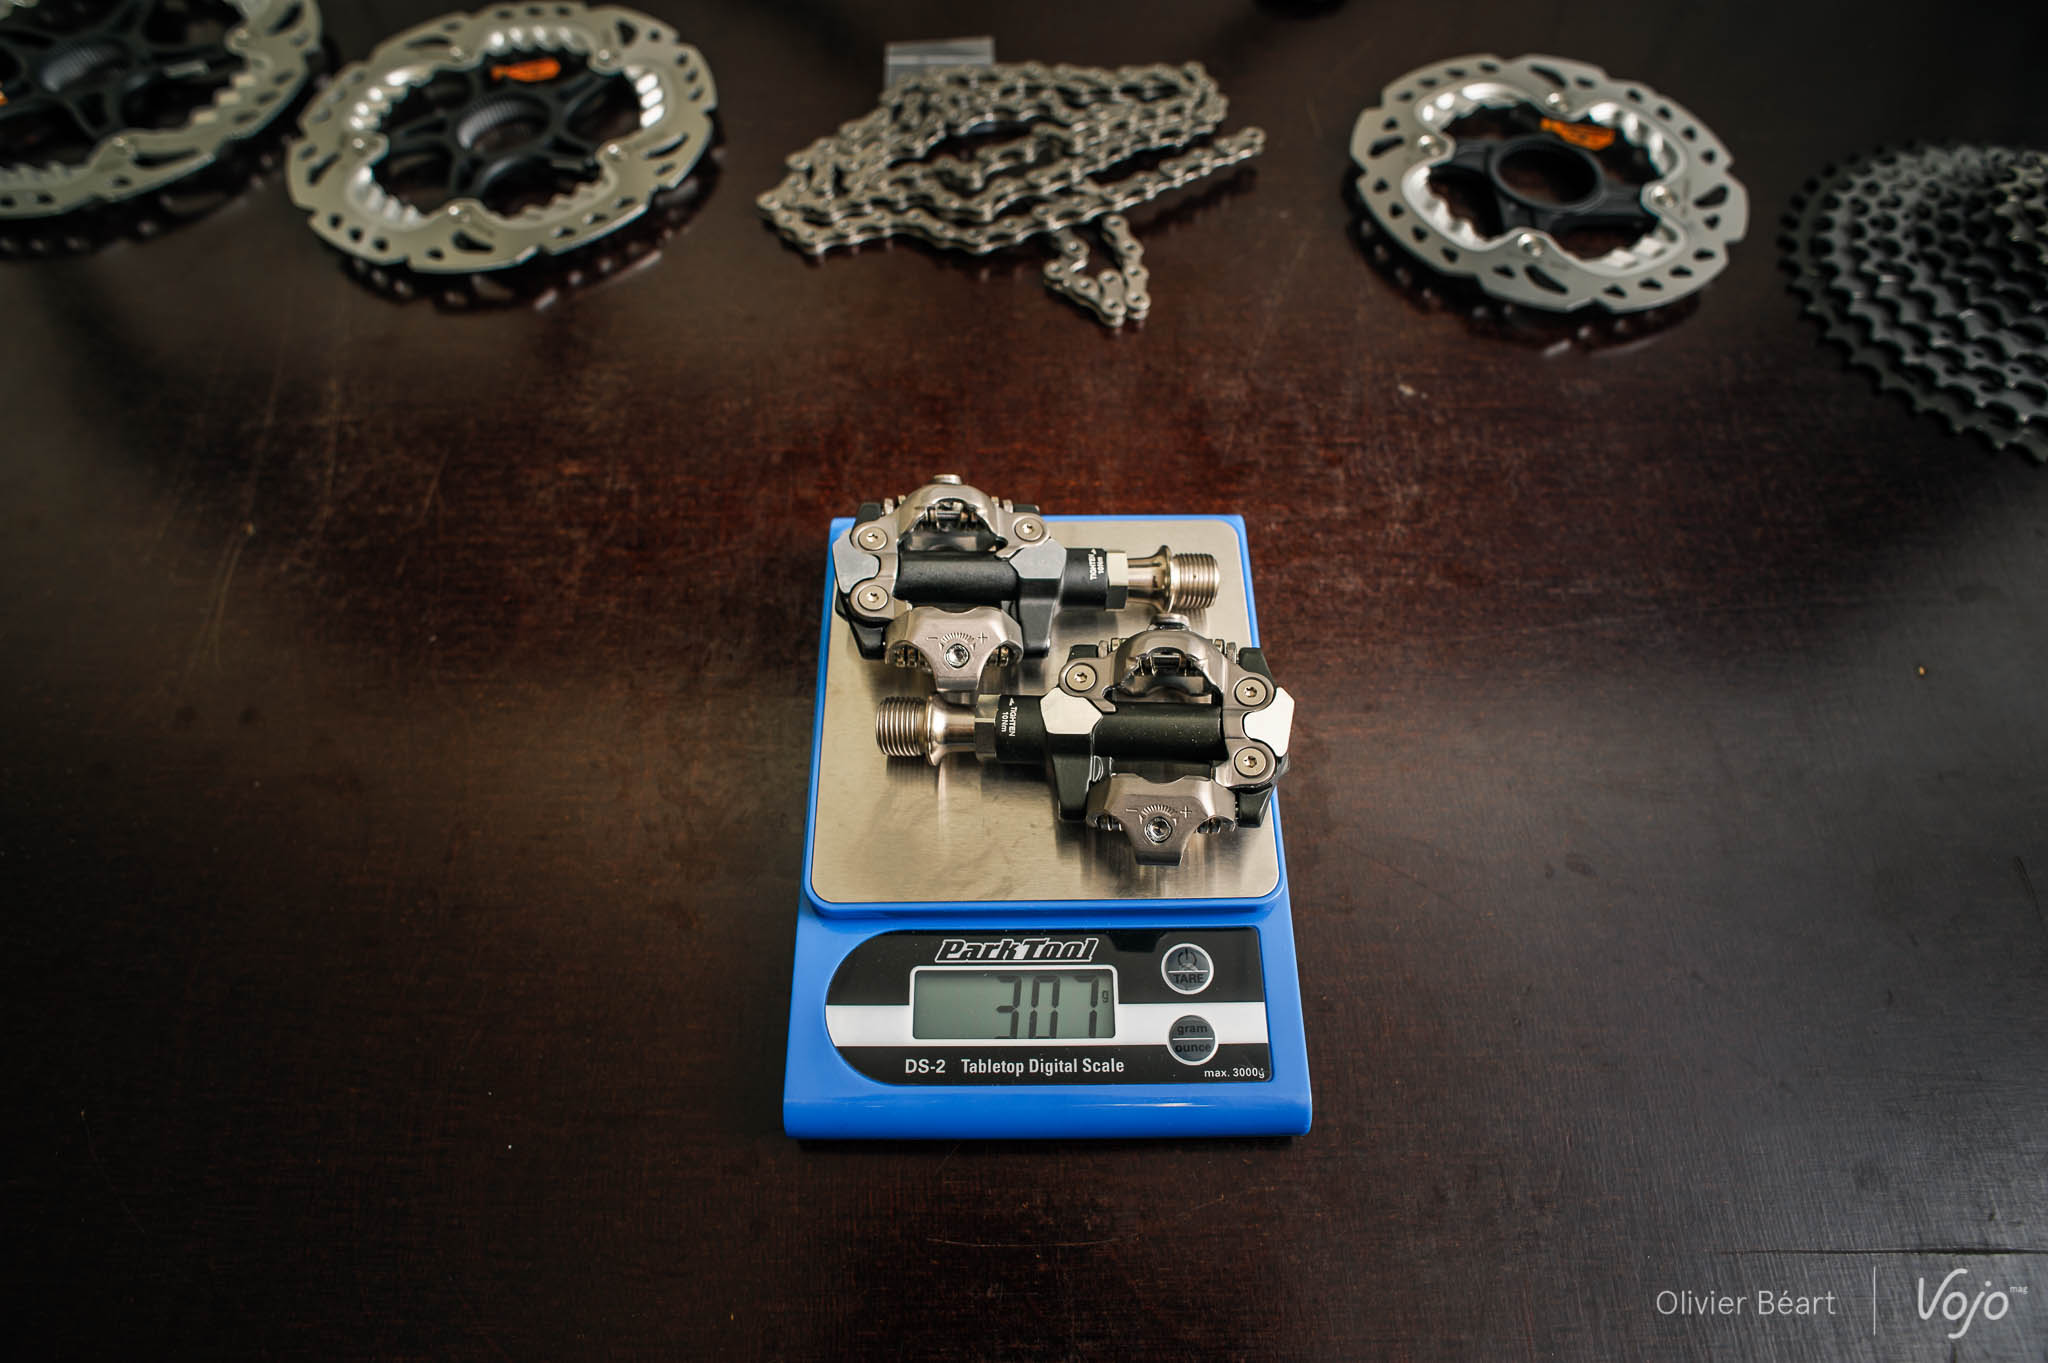 Shimano_XTR_Di2_Poids_Vérifies_Verfied_Weight_Copyright_OBeart_VojoMag-21